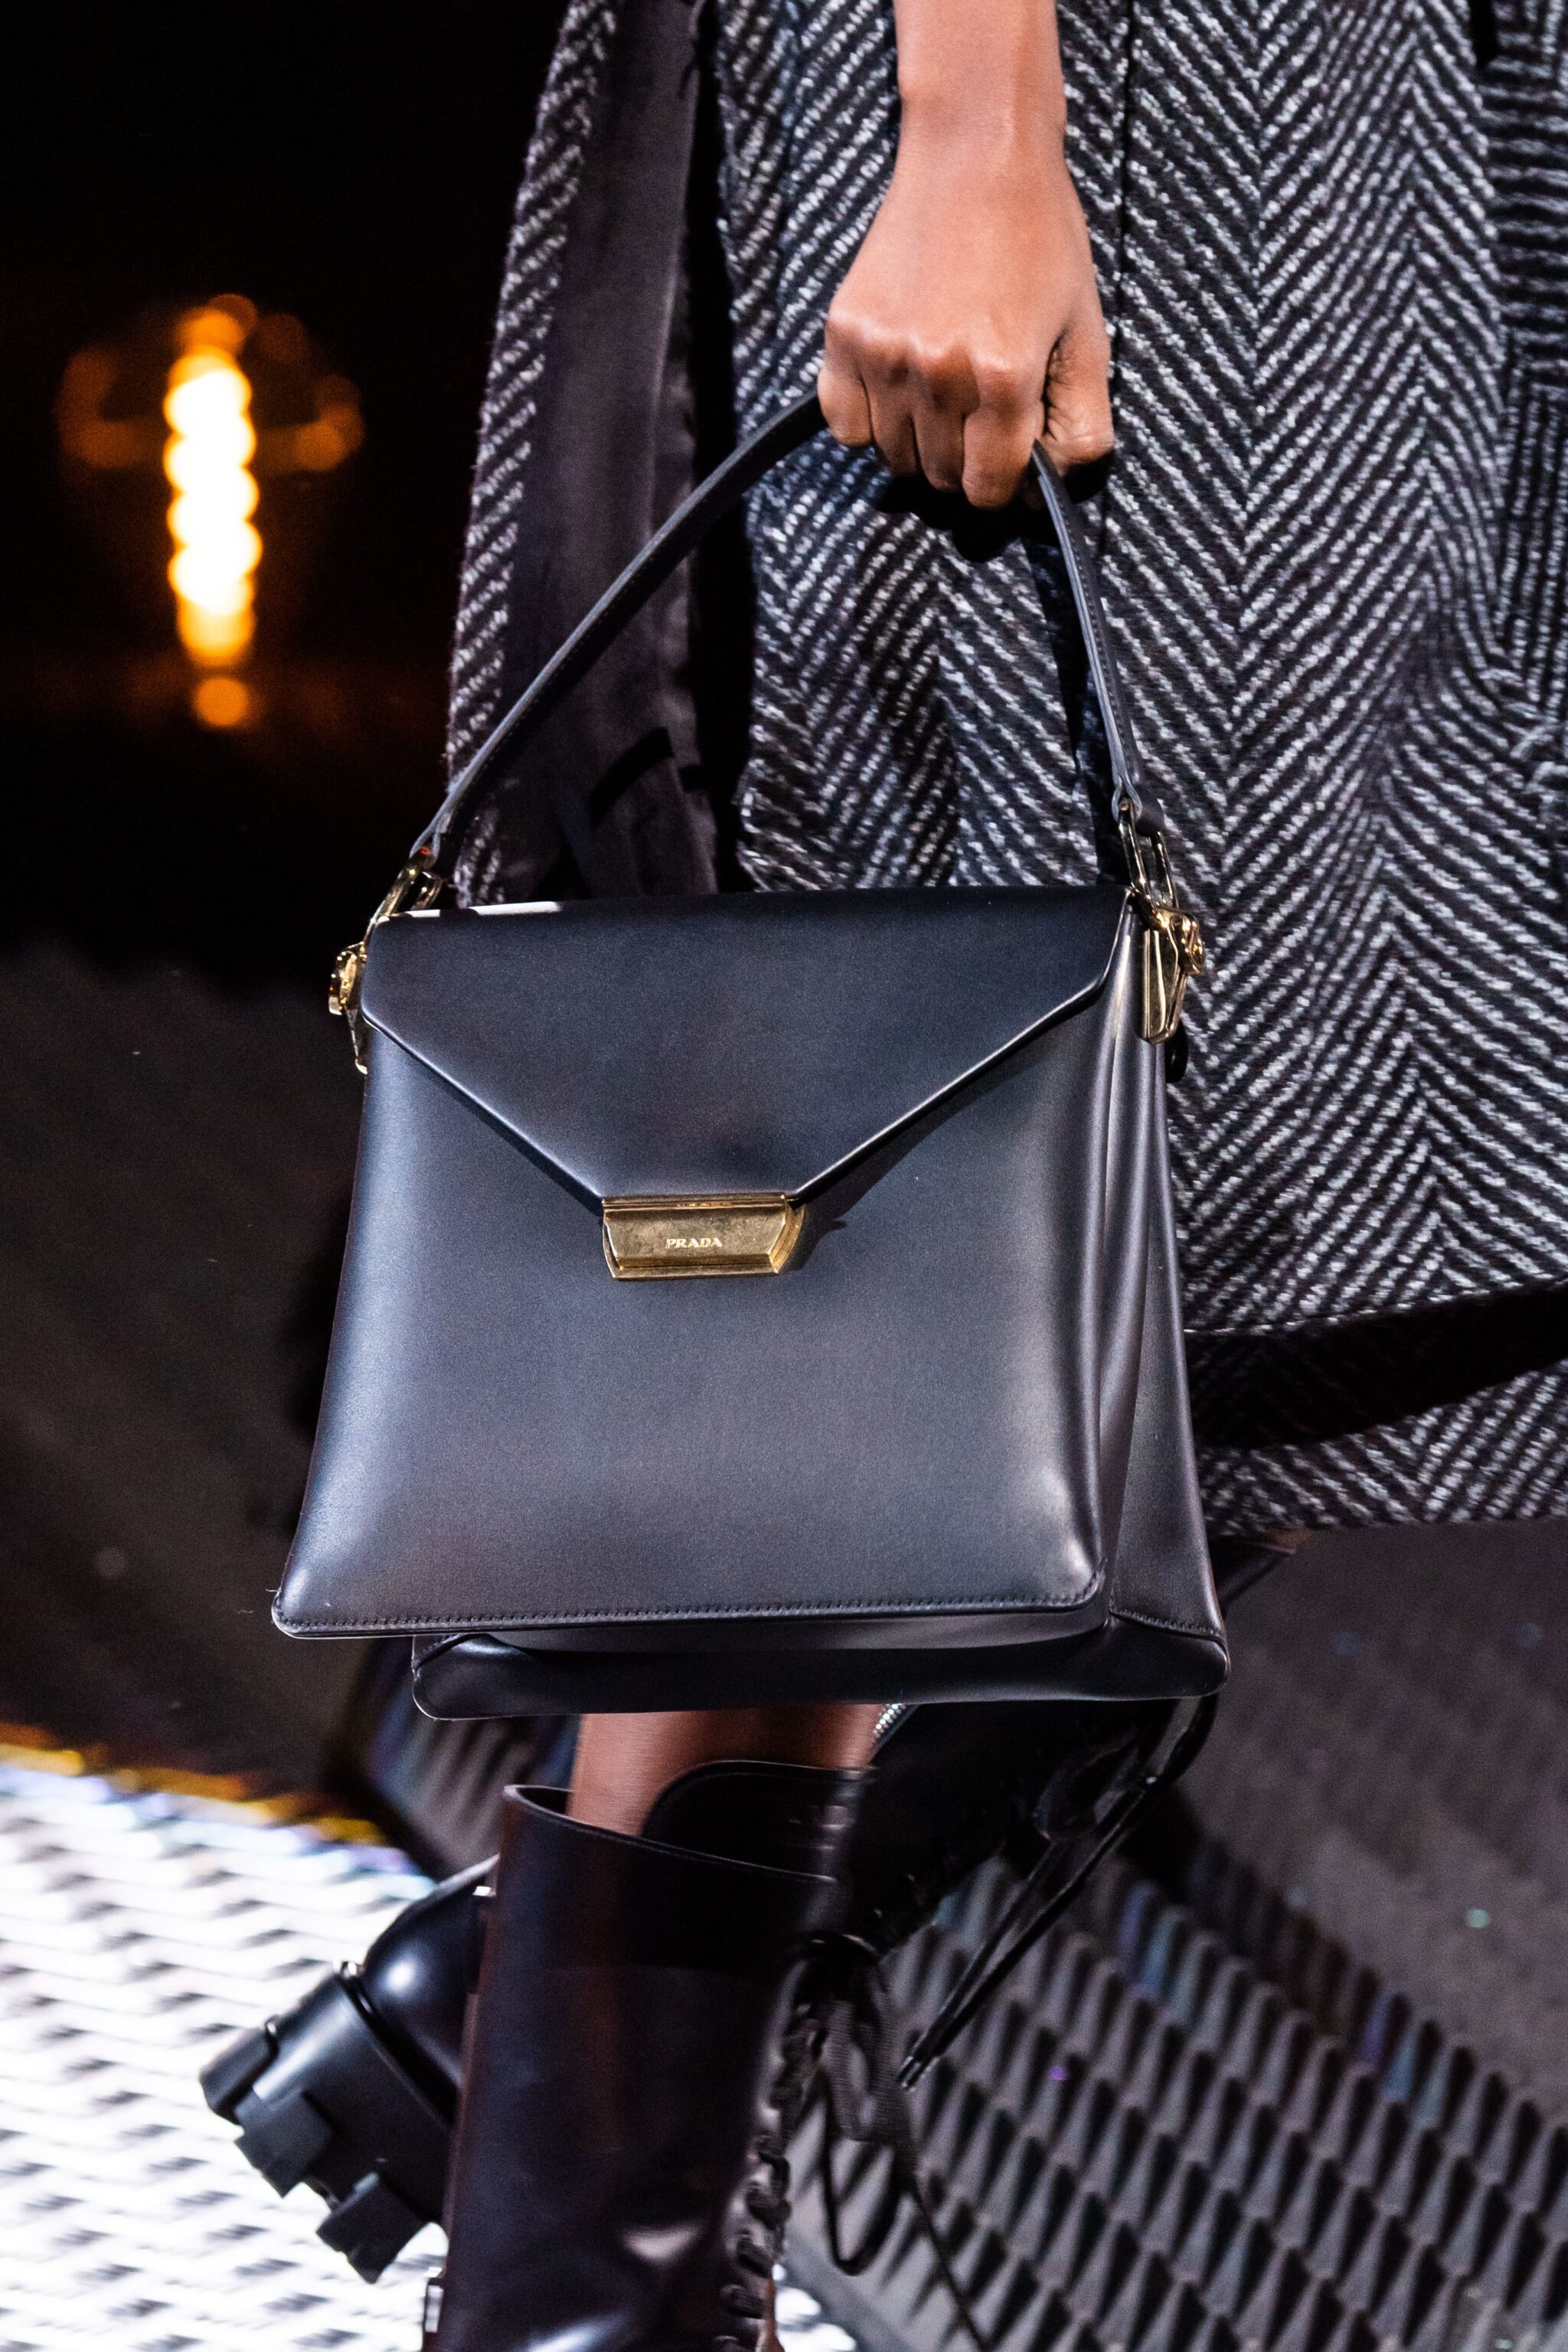 Prada Fall/Winter 2019 Runway Bag Collection | Spotted Fashion